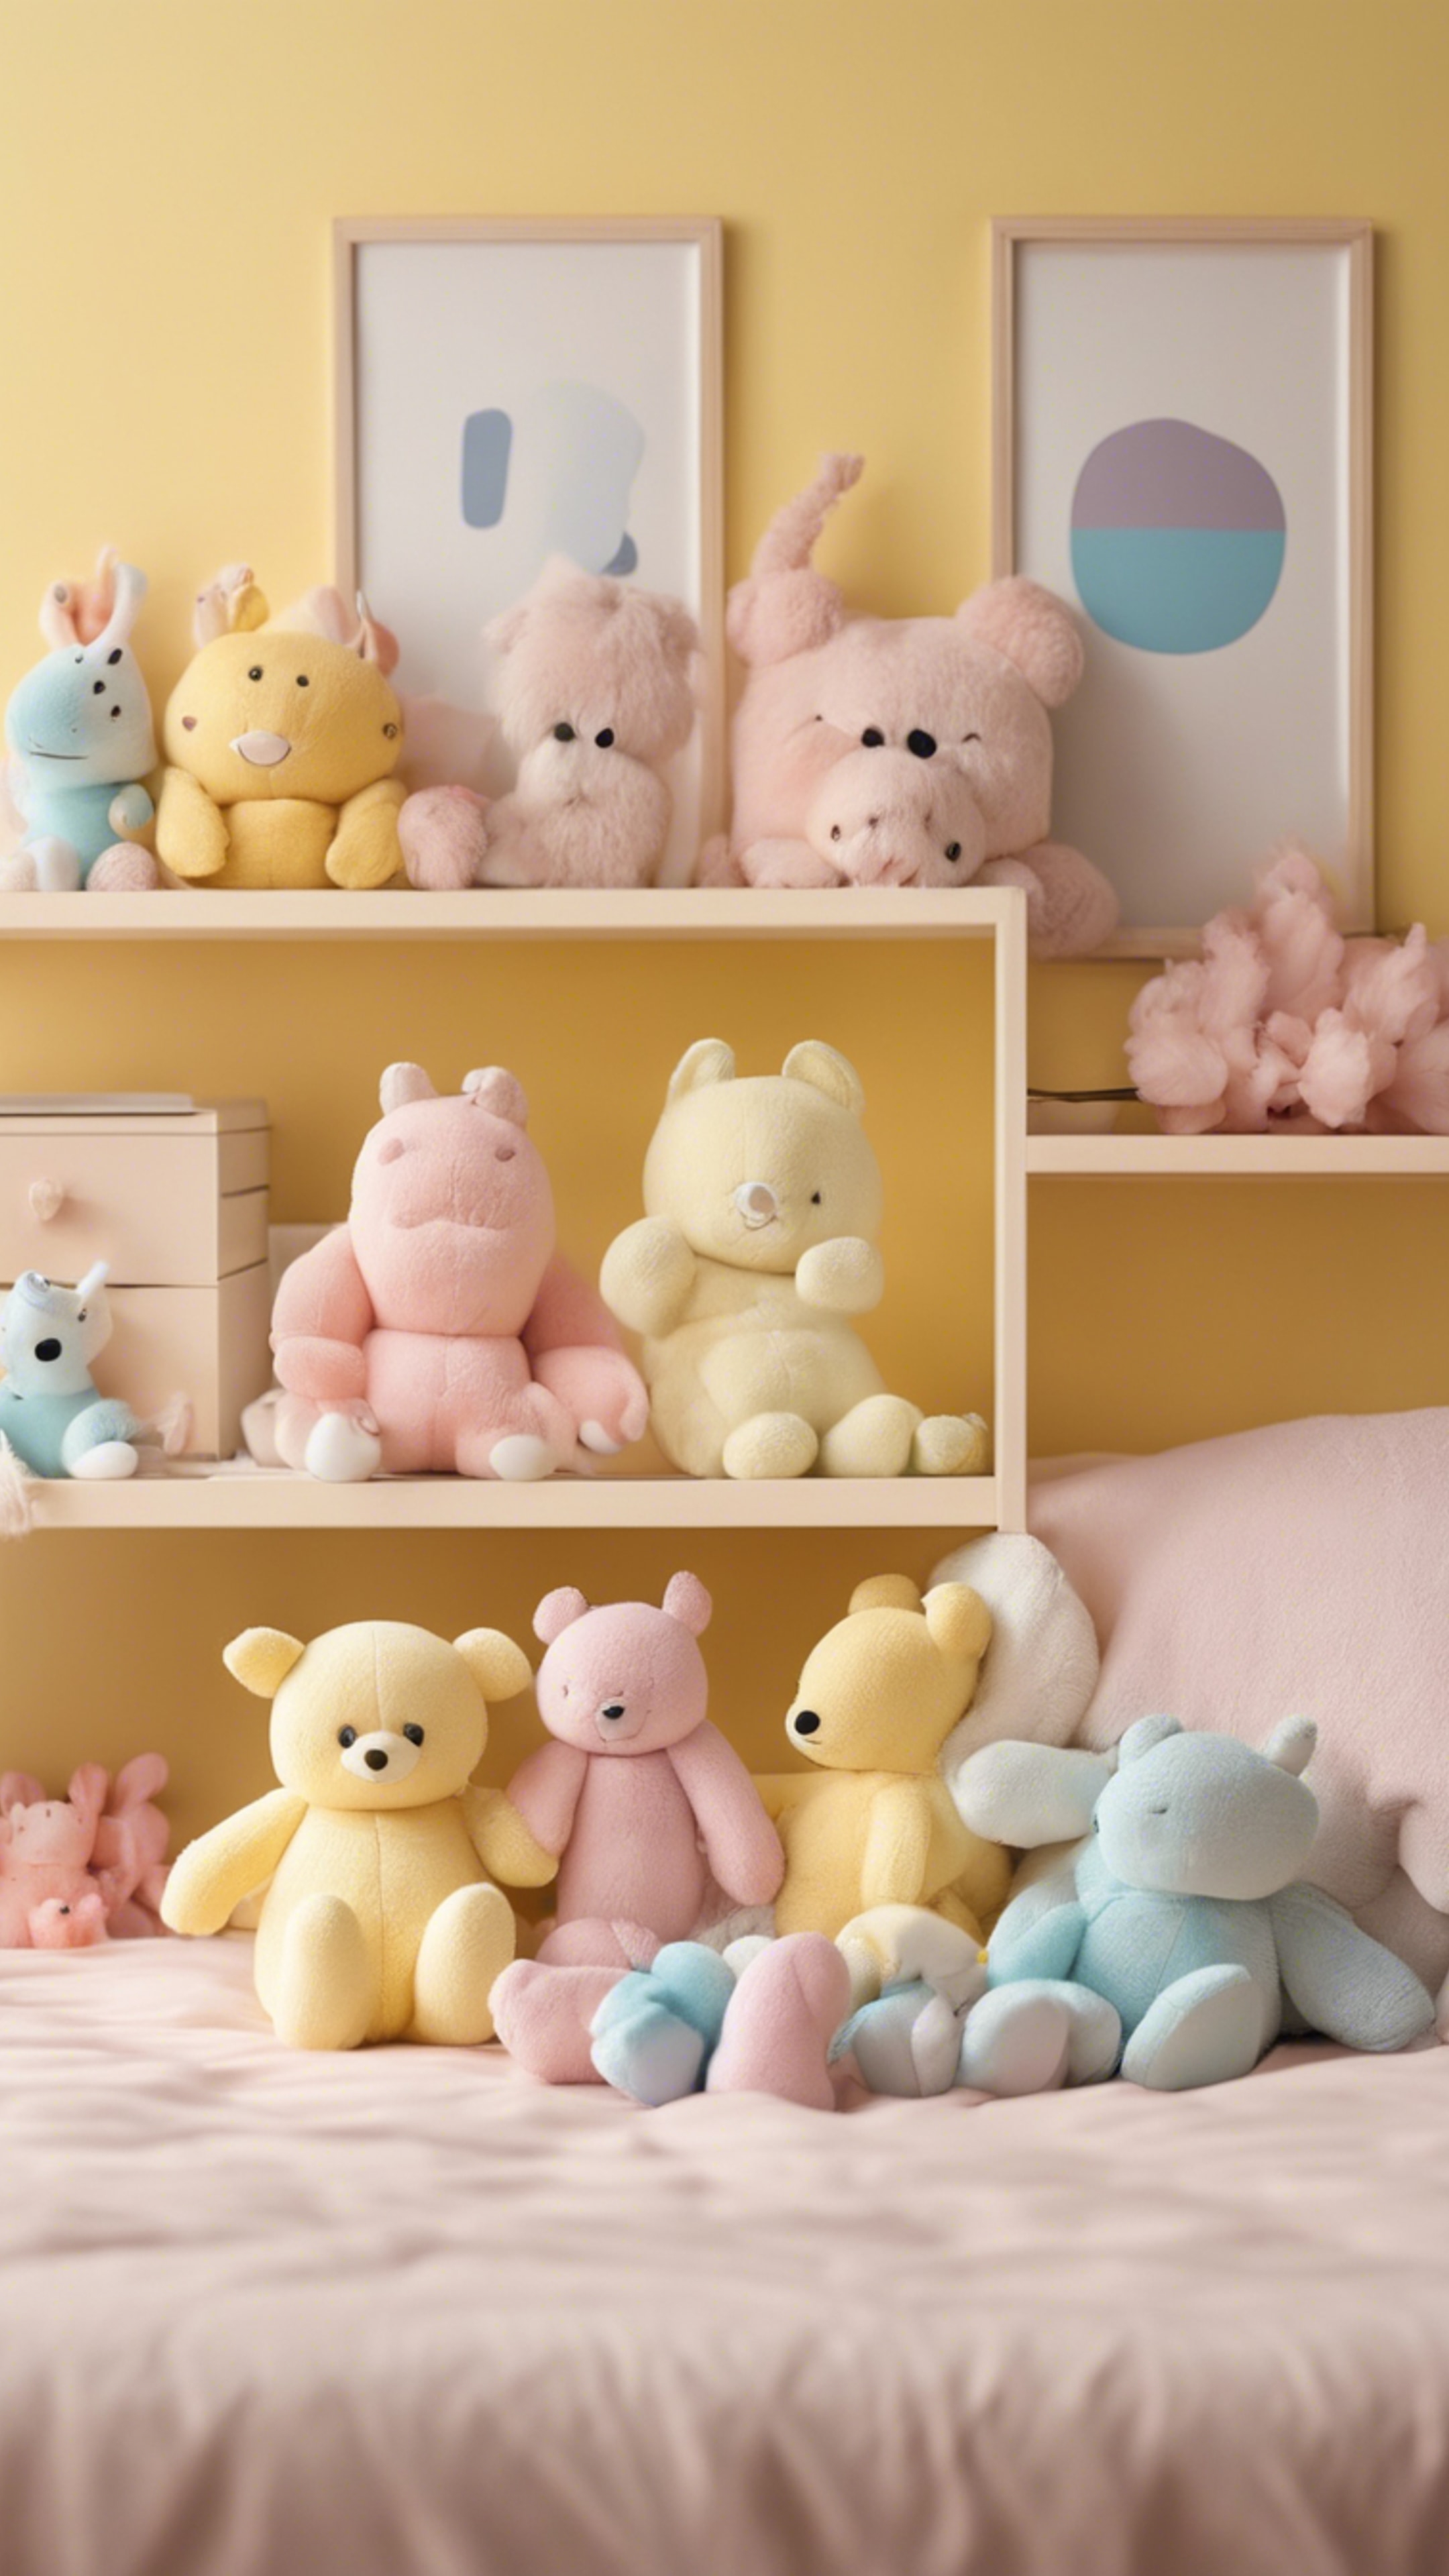 Tidy bedroom with pastel yellow walls decorated with kawaii plush toys. Fond d'écran[bea5098546c74f3e98b3]